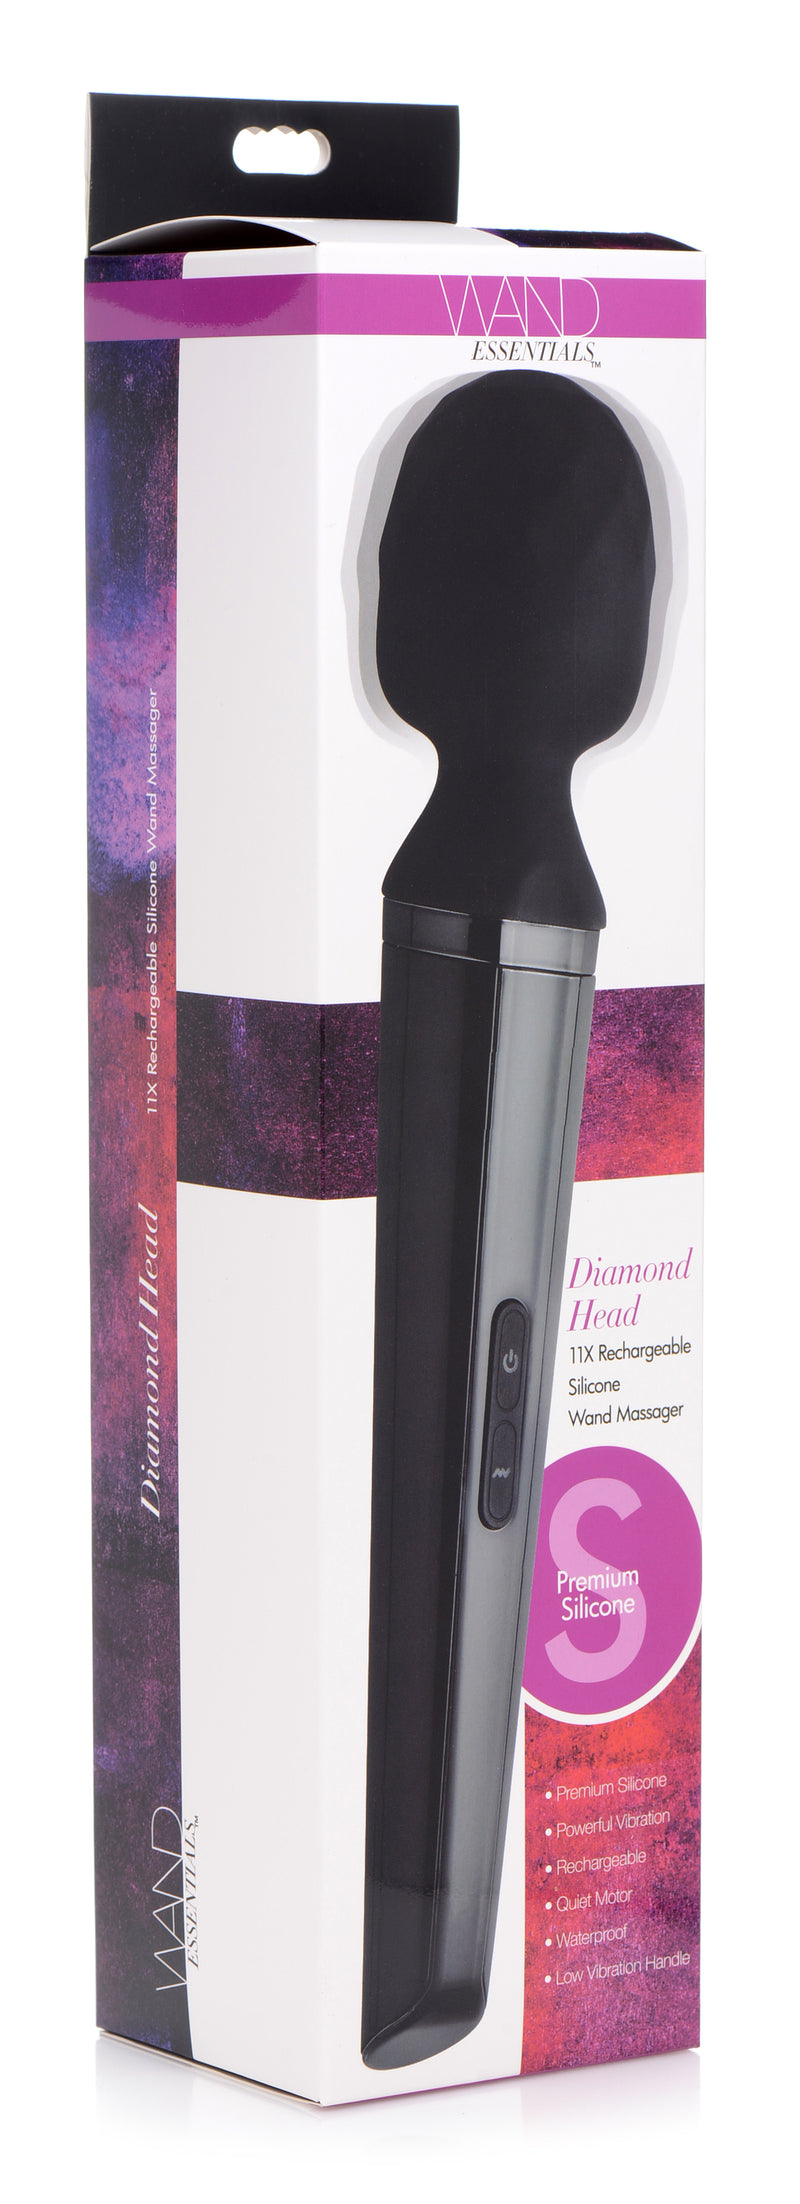 Diamond Head 24X Rechargeable Silicone Wand Massager wand-massagers from Wand Essentials